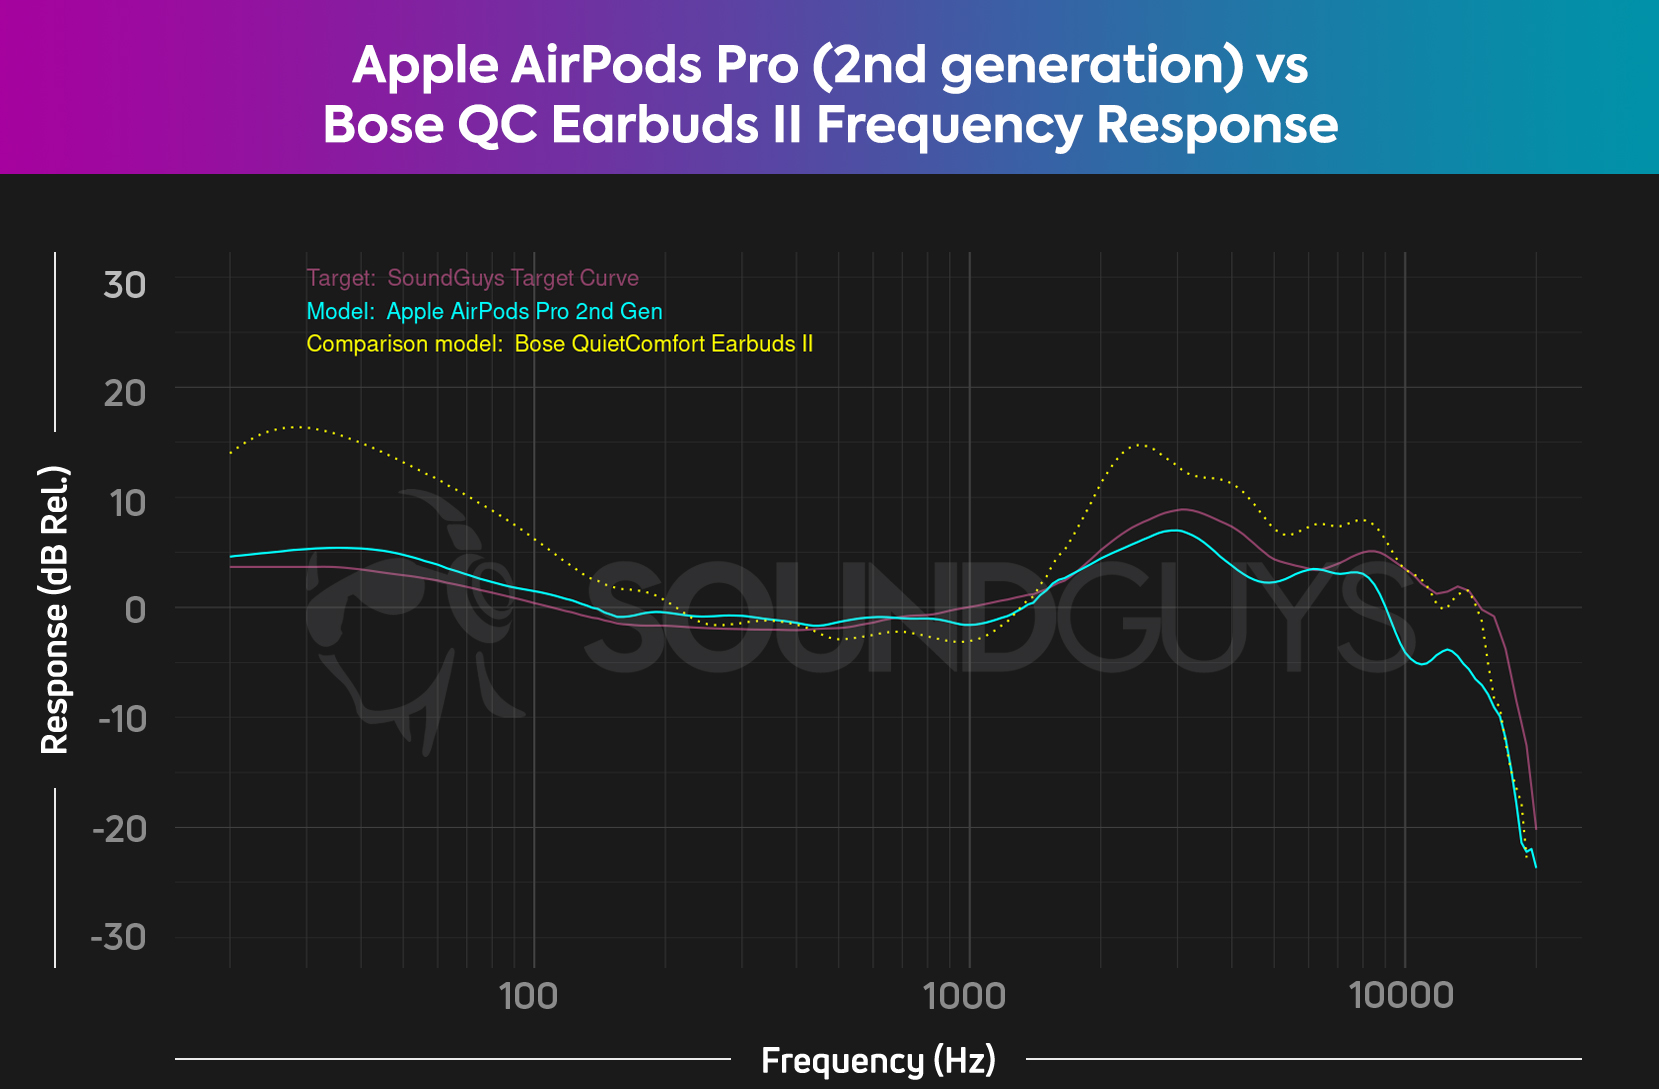 The frequency response comparison chart for the AirPods Pro (2nd generation) and the QuietComfort Earbuds II, which shows that the Bose QuietComfort Earbuds II is much bassier than the AirPods Pro.